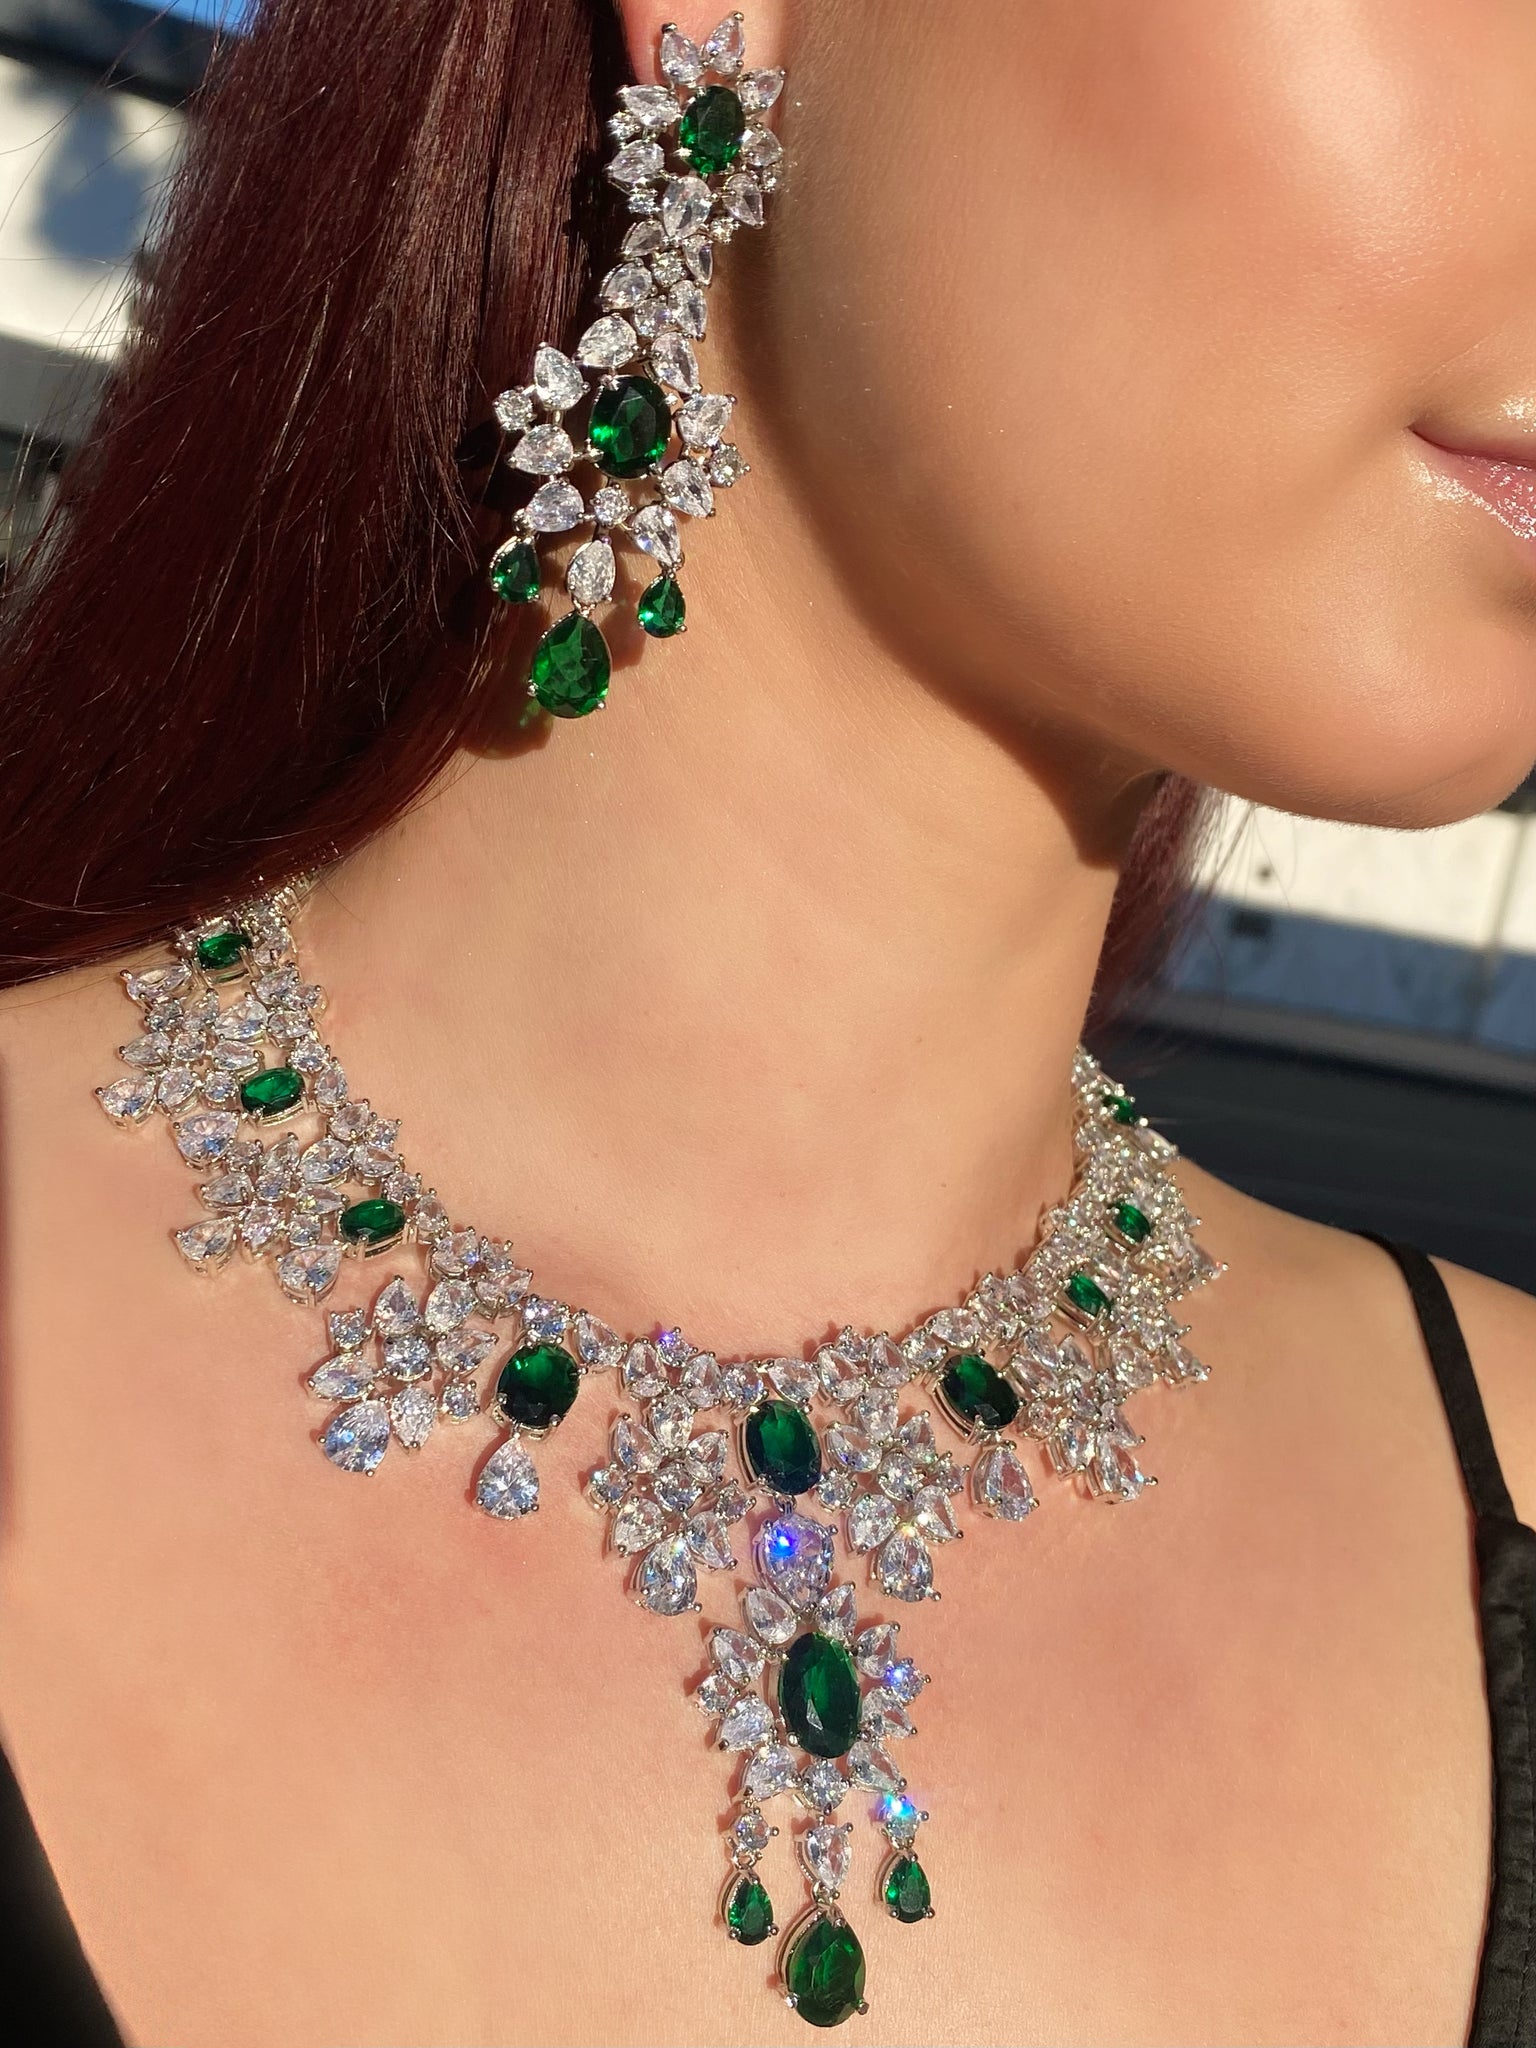 Emerald Green Diamondesque Necklace and Earrings